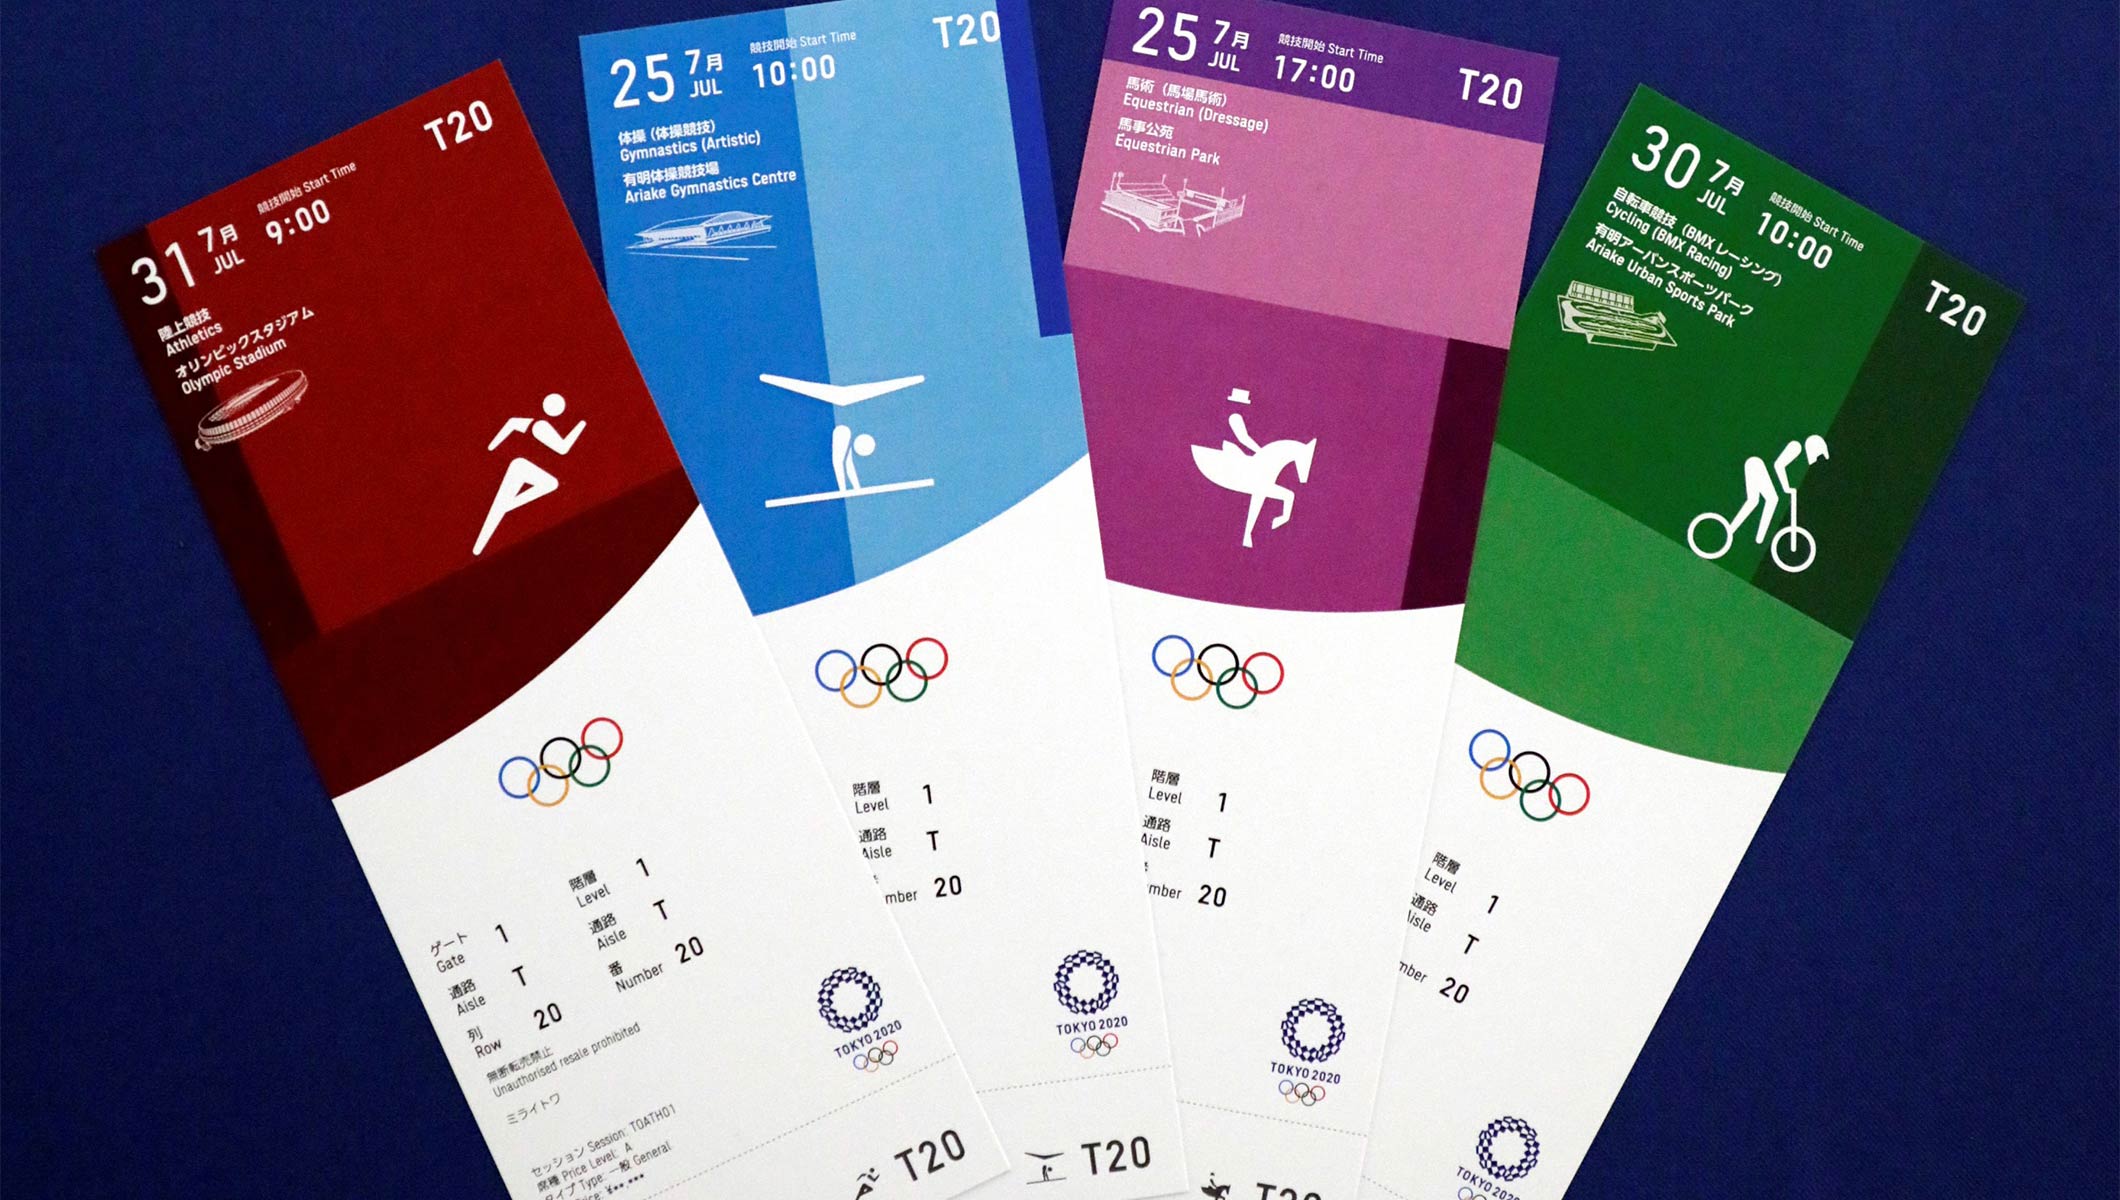 Us Olympics 2024 Tickets Price Guide Audrie